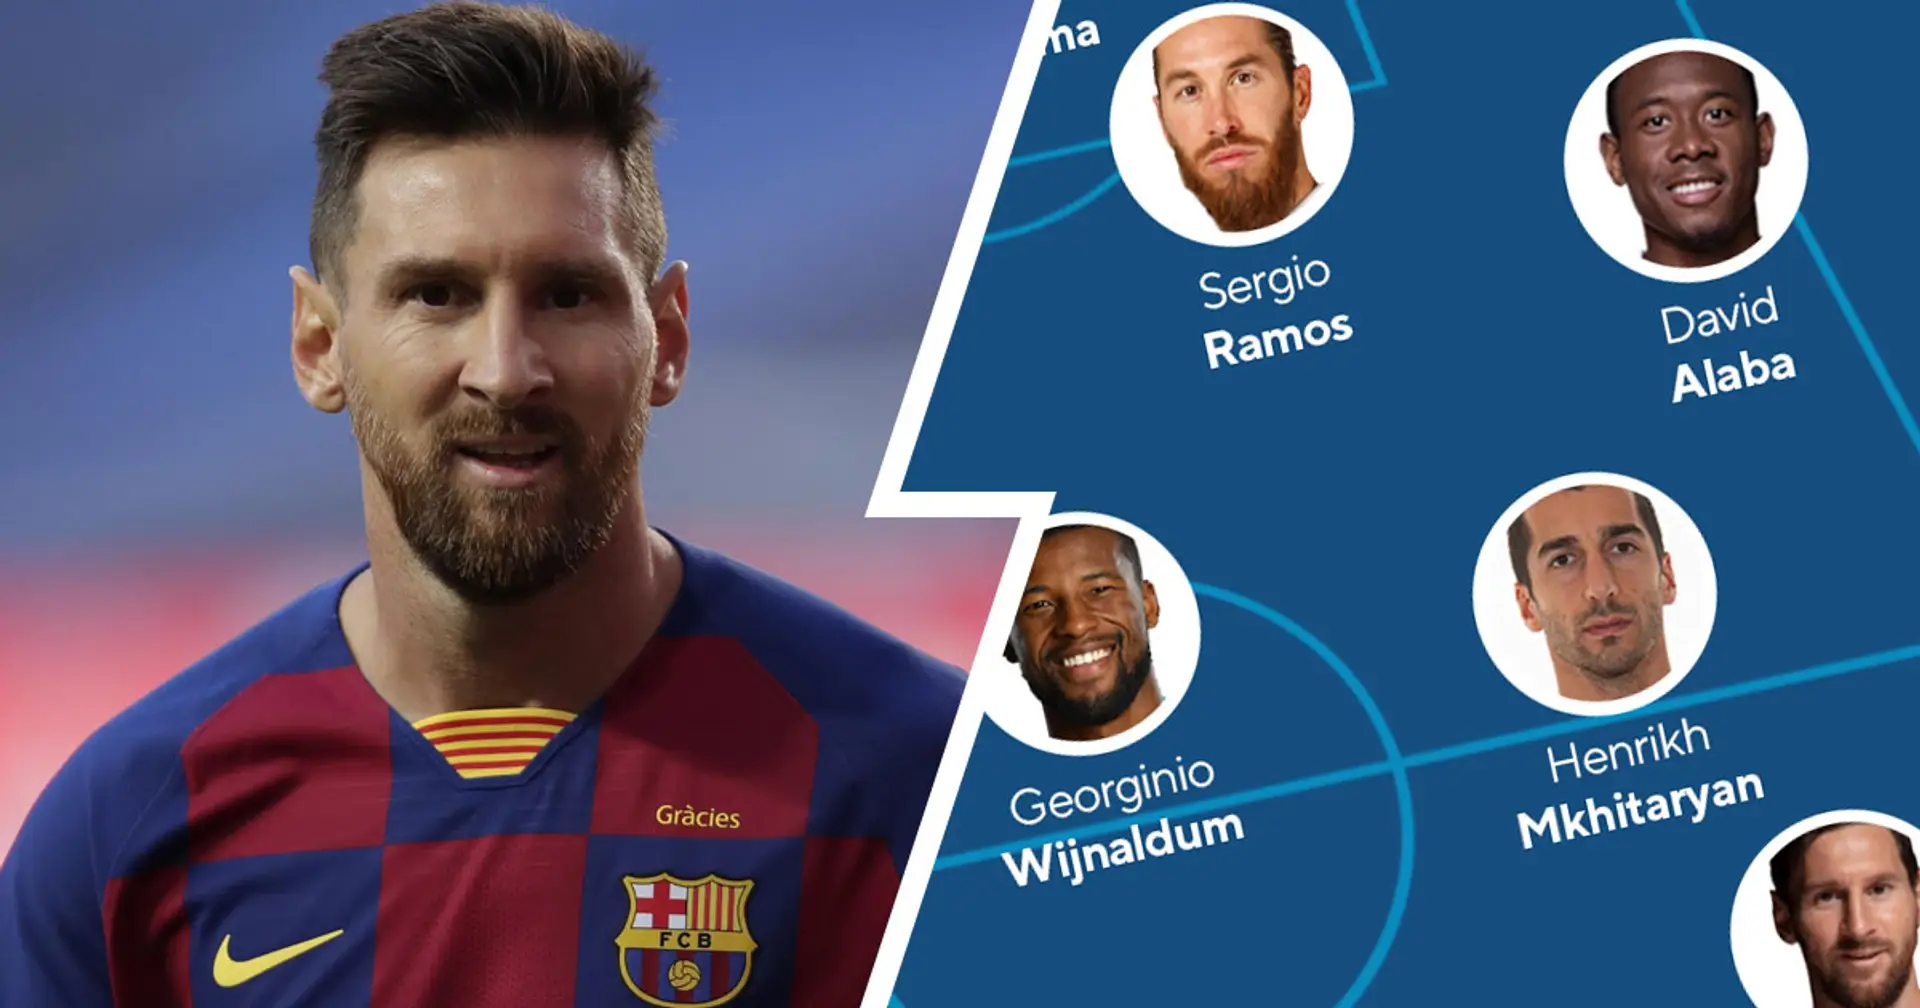 Leo Messi, David Alaba and more: Most interesting free agent XI in summer 2021 transfer window